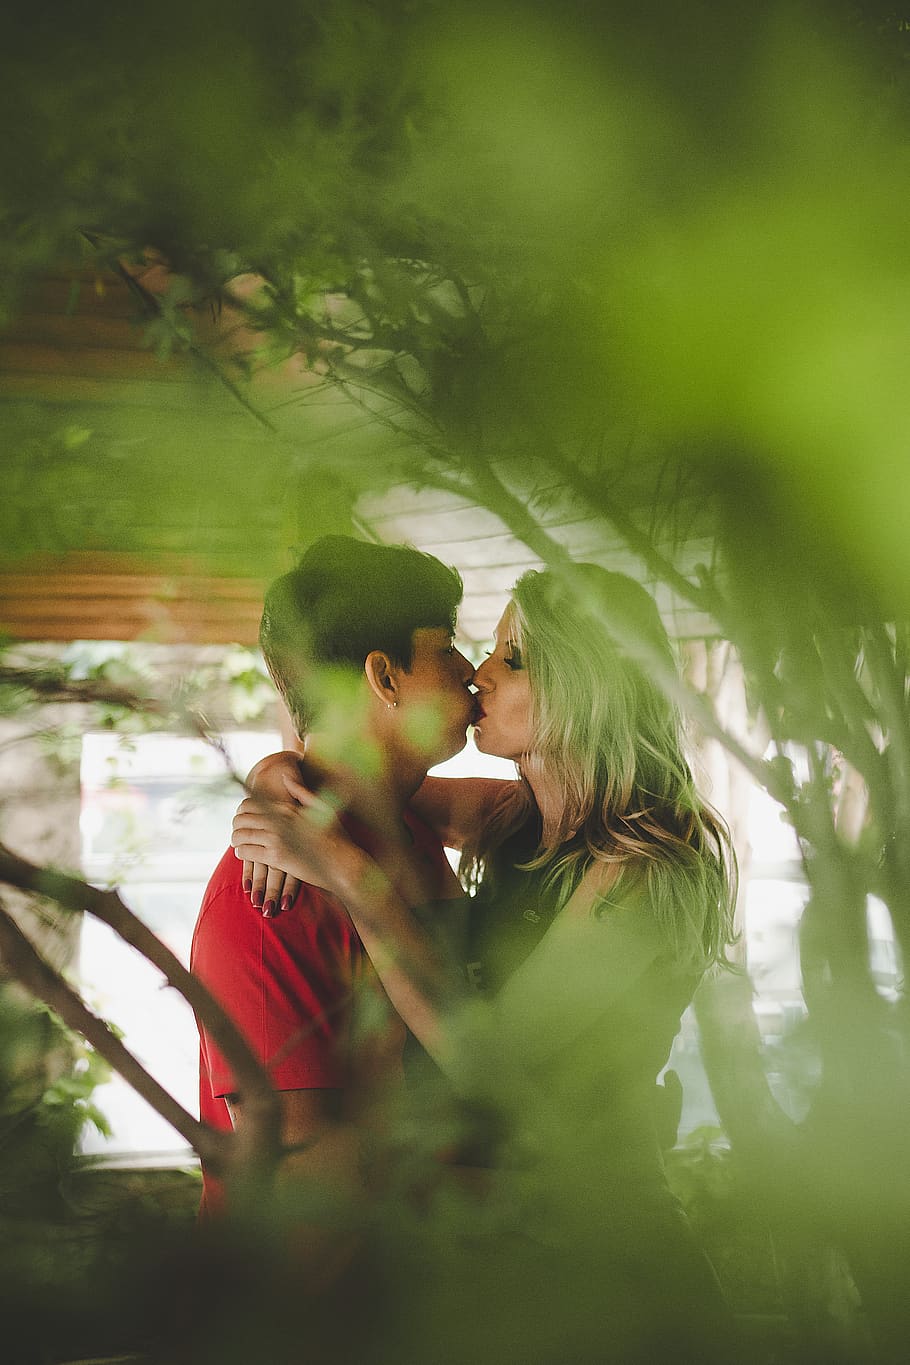 HD wallpaper: Selective Focus Photo of Kissing Couple, embrace, in love,  man | Wallpaper Flare